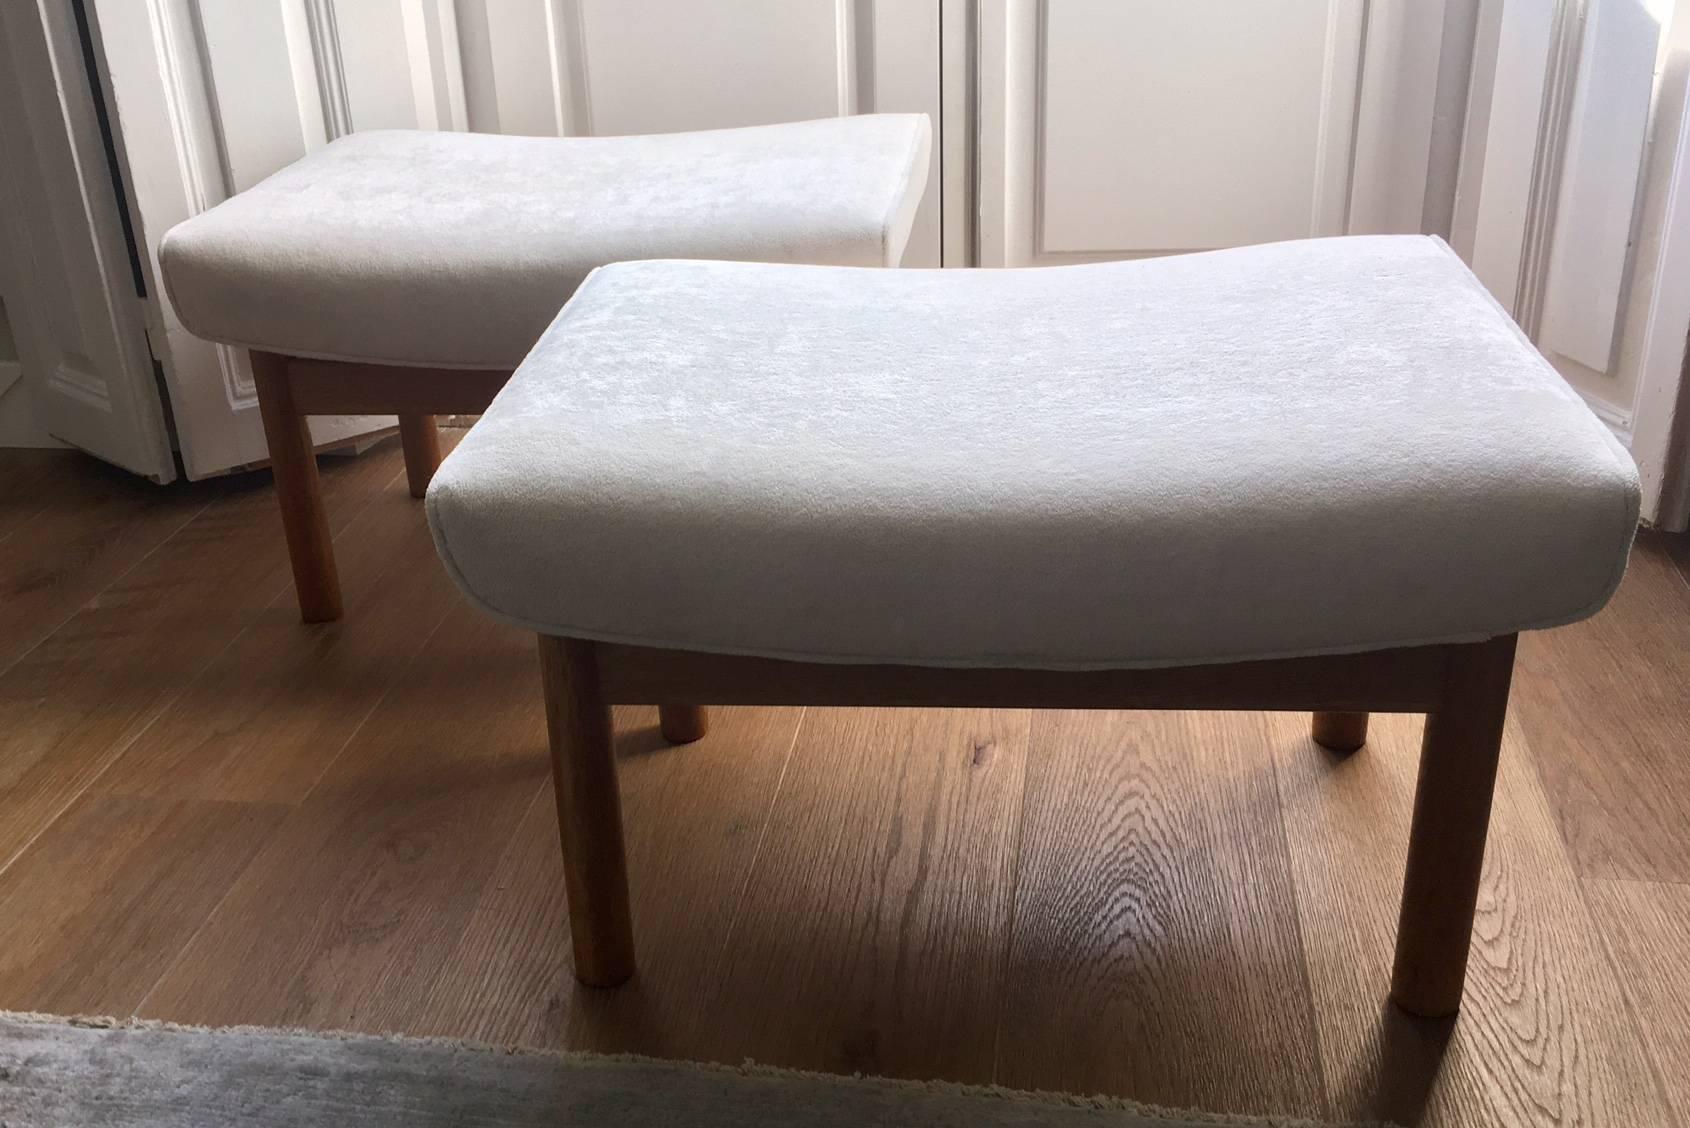 Pair of Ejner Larsen and Aksel Bender stools, produced by Willy Beck, Copenhagen, Denmark in 1961. Oak frame, upholstered with white velour textile. The seats are marked underneath with the names of the producer and the architects.